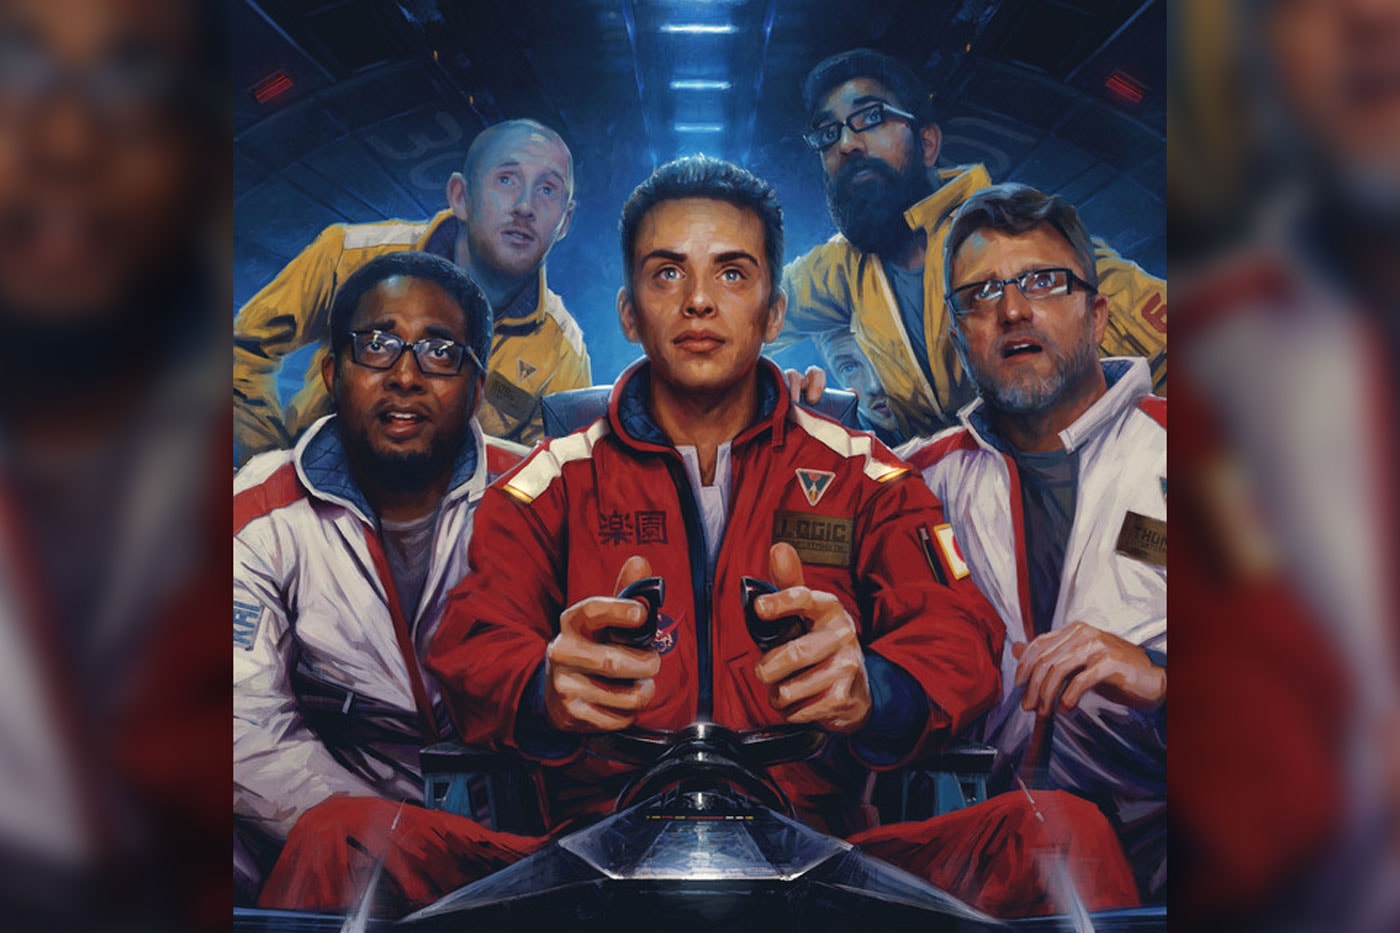 Logic - The Incredible True Story (Tracklist)